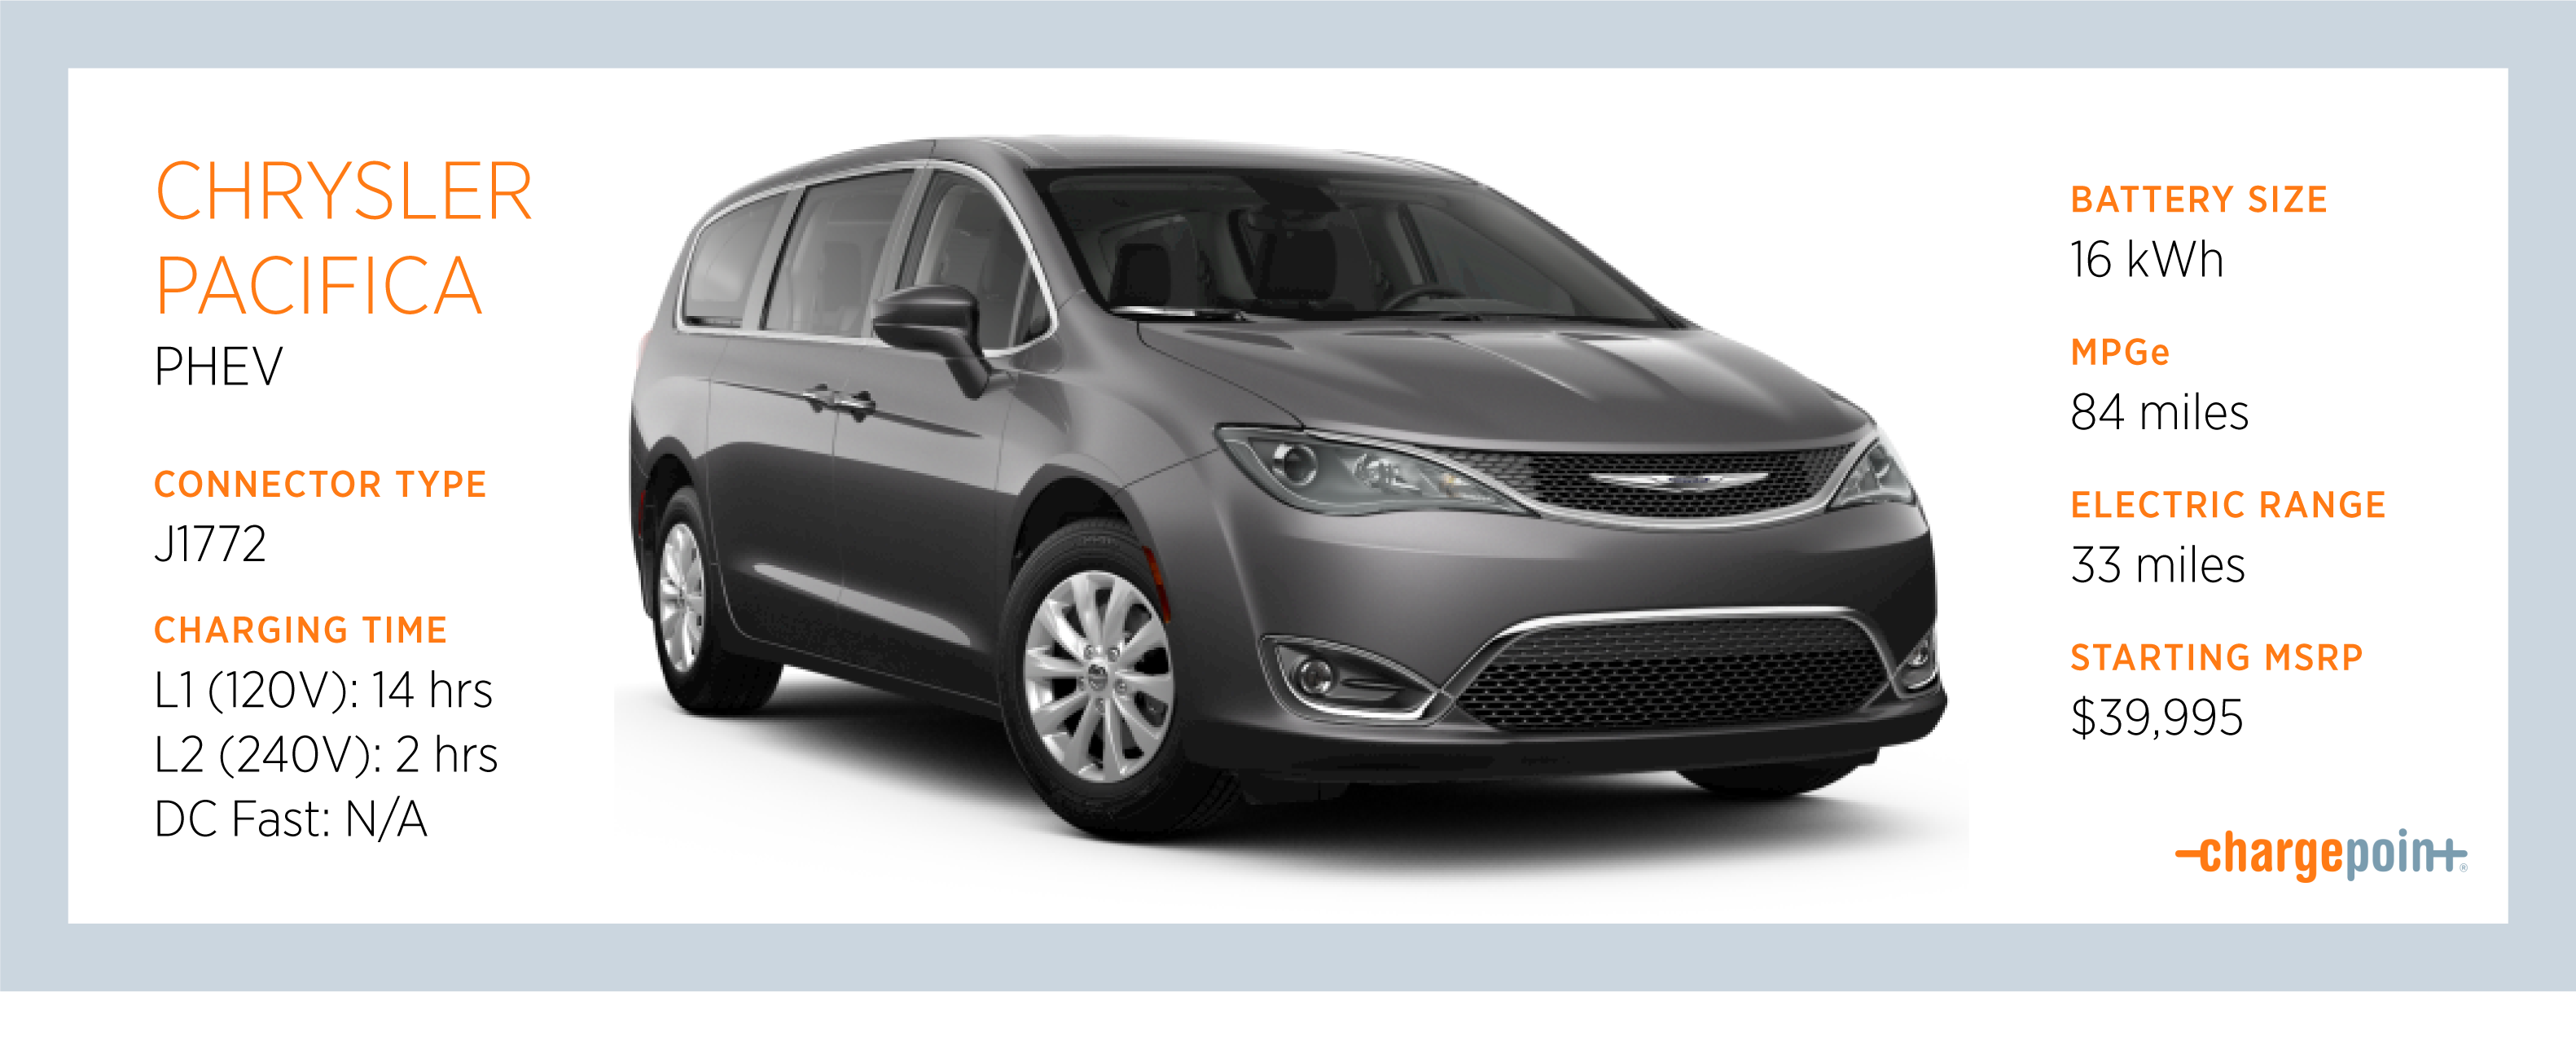 your-guide-to-charging-the-chrysler-pacifica-plug-in-hybrid-chargepoint